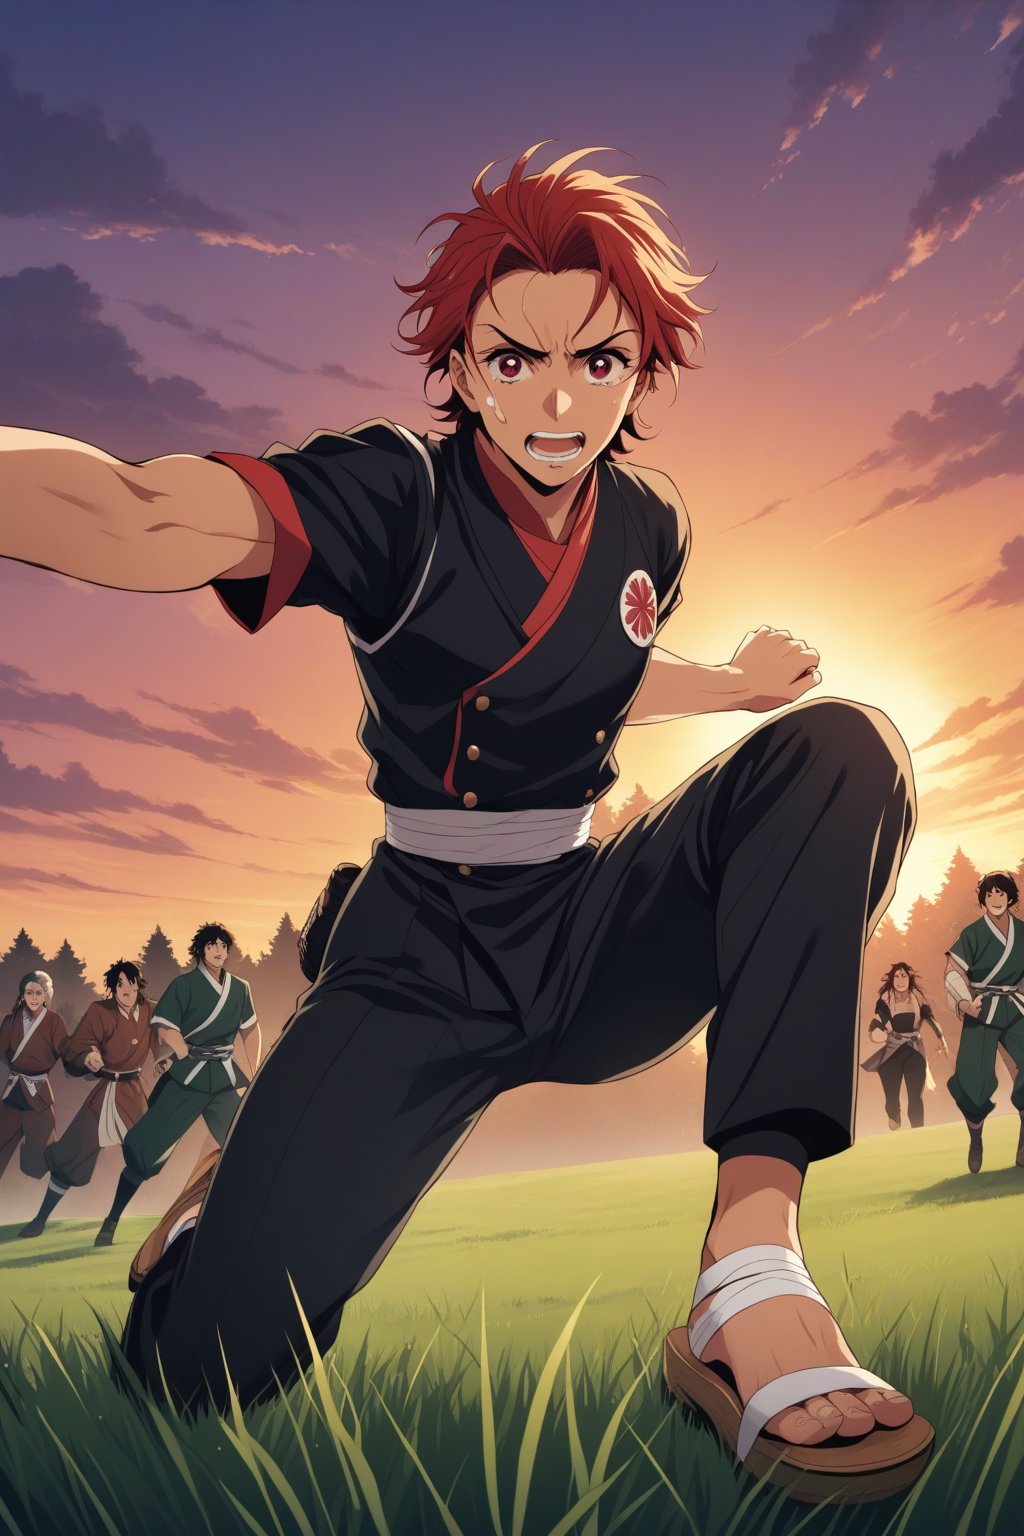 (masterpiece, best quality, ultra HD anime quality, super high resolution, 1980s/(style), retro, anatomically accurate, perfect anatomy), (tanjirou_kamado), one boy, solo, (red hair, short hair, slicked back, messy hair, forehead, red eyes, crying face), crying tears, tears scattered around, scars, scars on face, scars on forehead, (mouth open as if screaming), (ear accessory, rising sun tag), looking at camera, (Demon Slayer uniform top, Demon Slayer uniform pants, navy blue uniform), (Bandages wrapped around both feet), wearing straw sandals, (four fingers and one thumb), (chasing, diving, one arm stretched straight out, all fingers extended, arm spread wide, one arm pointing toward the ground, legs spread wide, in a grassland), (sunset view, distant forest, grassland, dim grassland, grass, sunset), (side view, angle from below), score 9, score 8_up, score 7_up, score 6_up,